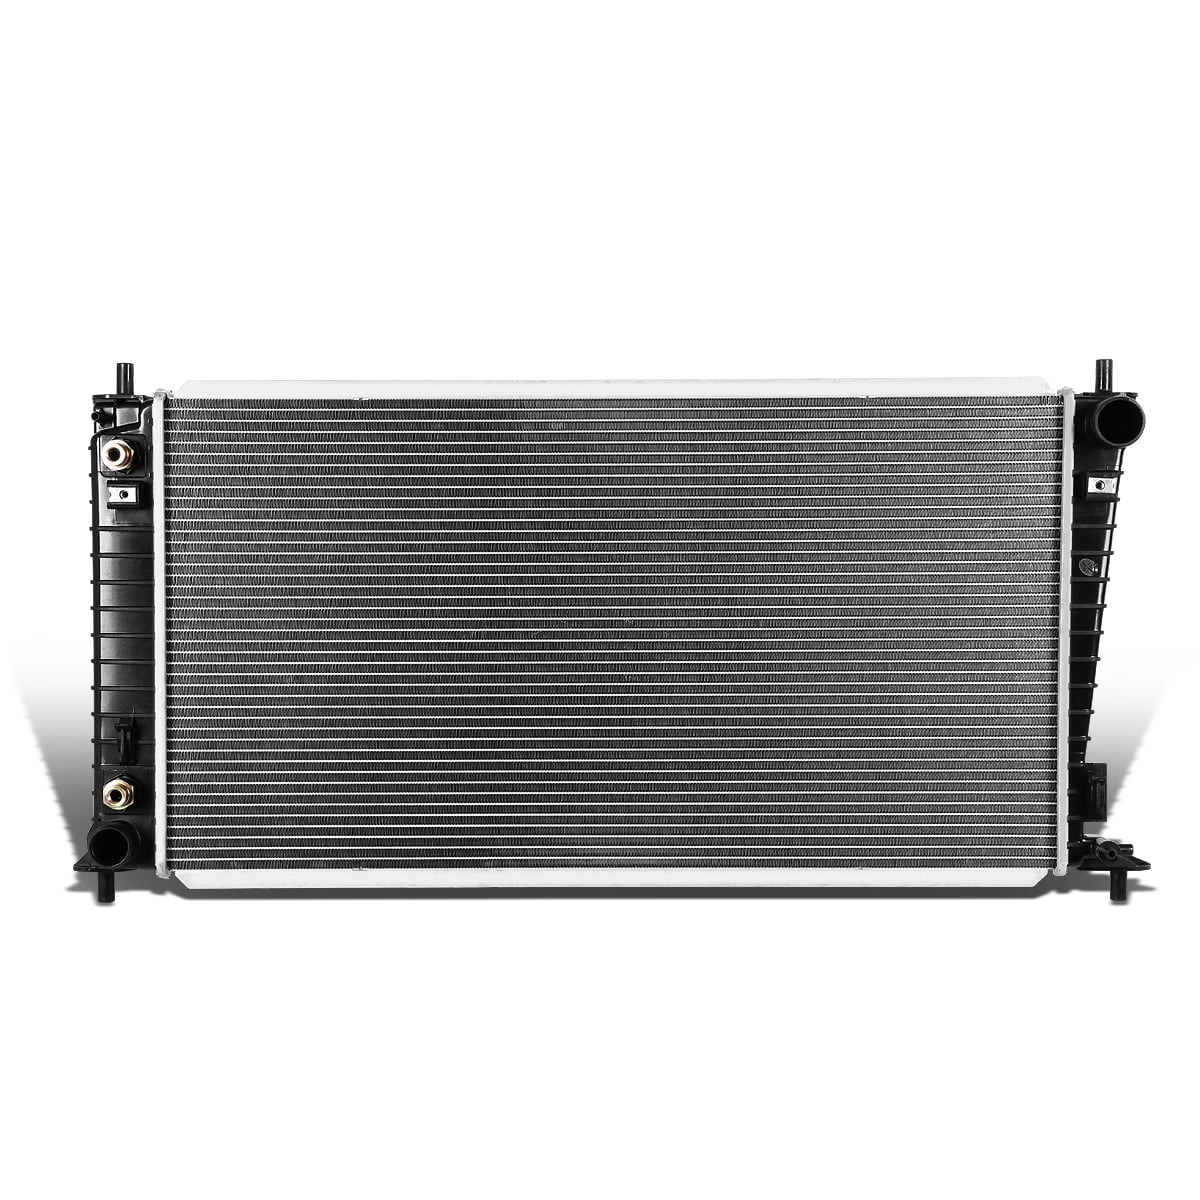 TYC 13099 Radiator for Ford Expedition, F-150, Lincoln Navigator FO3010288  Fits select: 2009-2010 FORD F150 